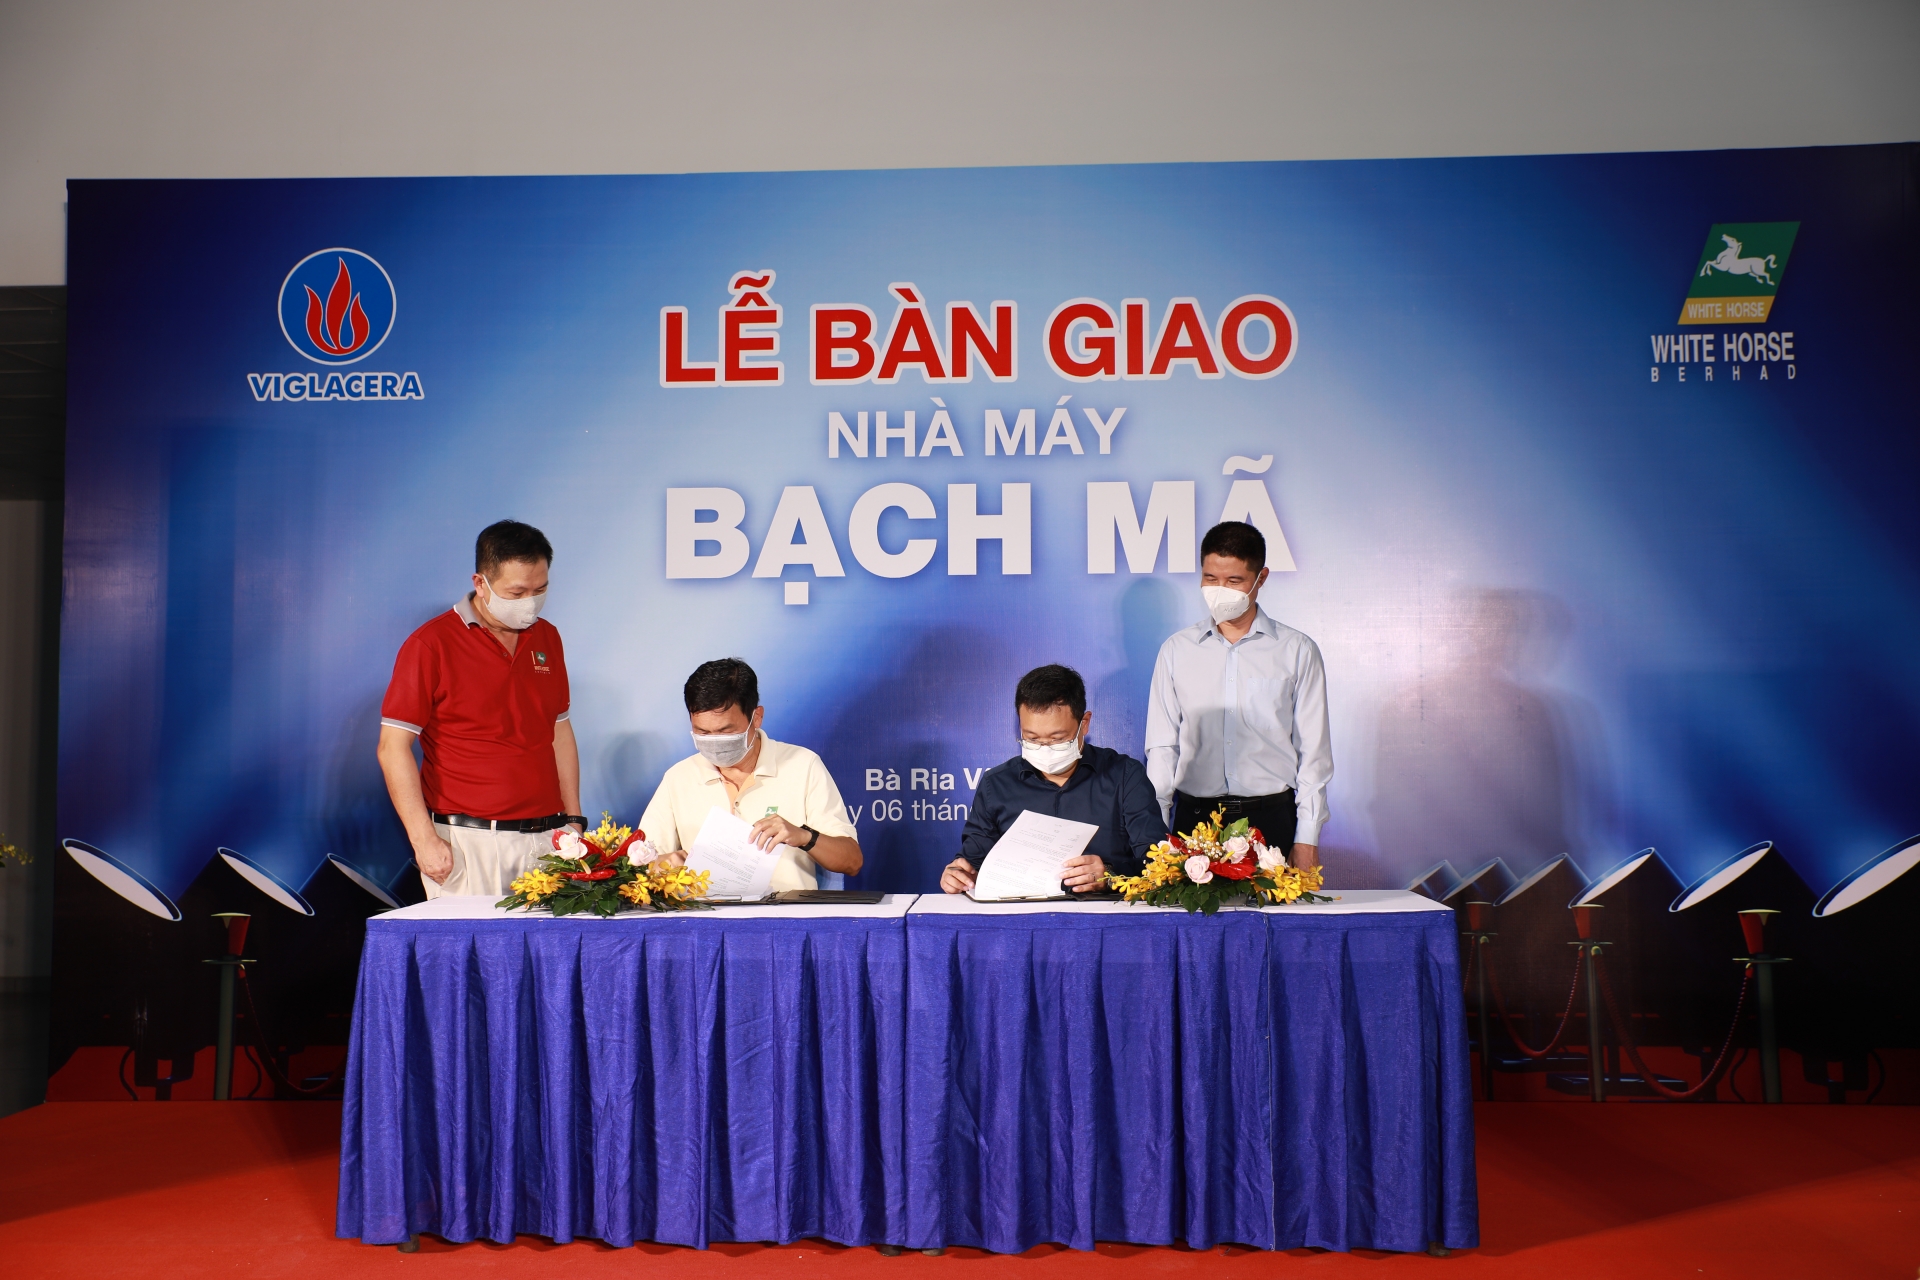 Bach Ma Factory was officially renamed Viglacera My Duc 2 Factory after being handed over to Viglacera